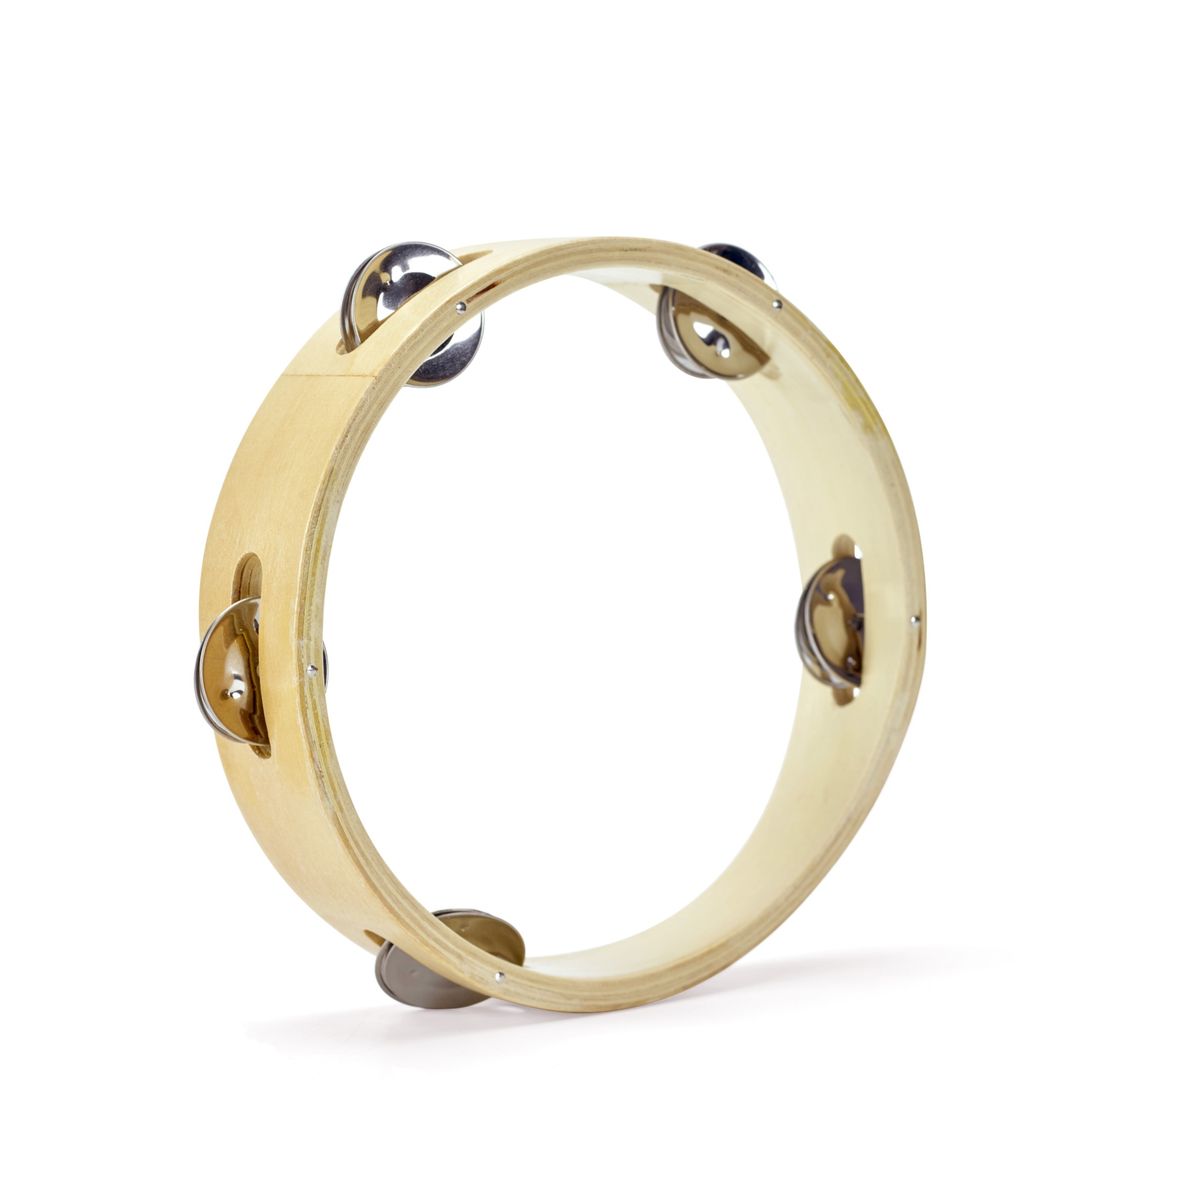 Headless Tambourine with 5 bells | Shop Today. Get it Tomorrow ...